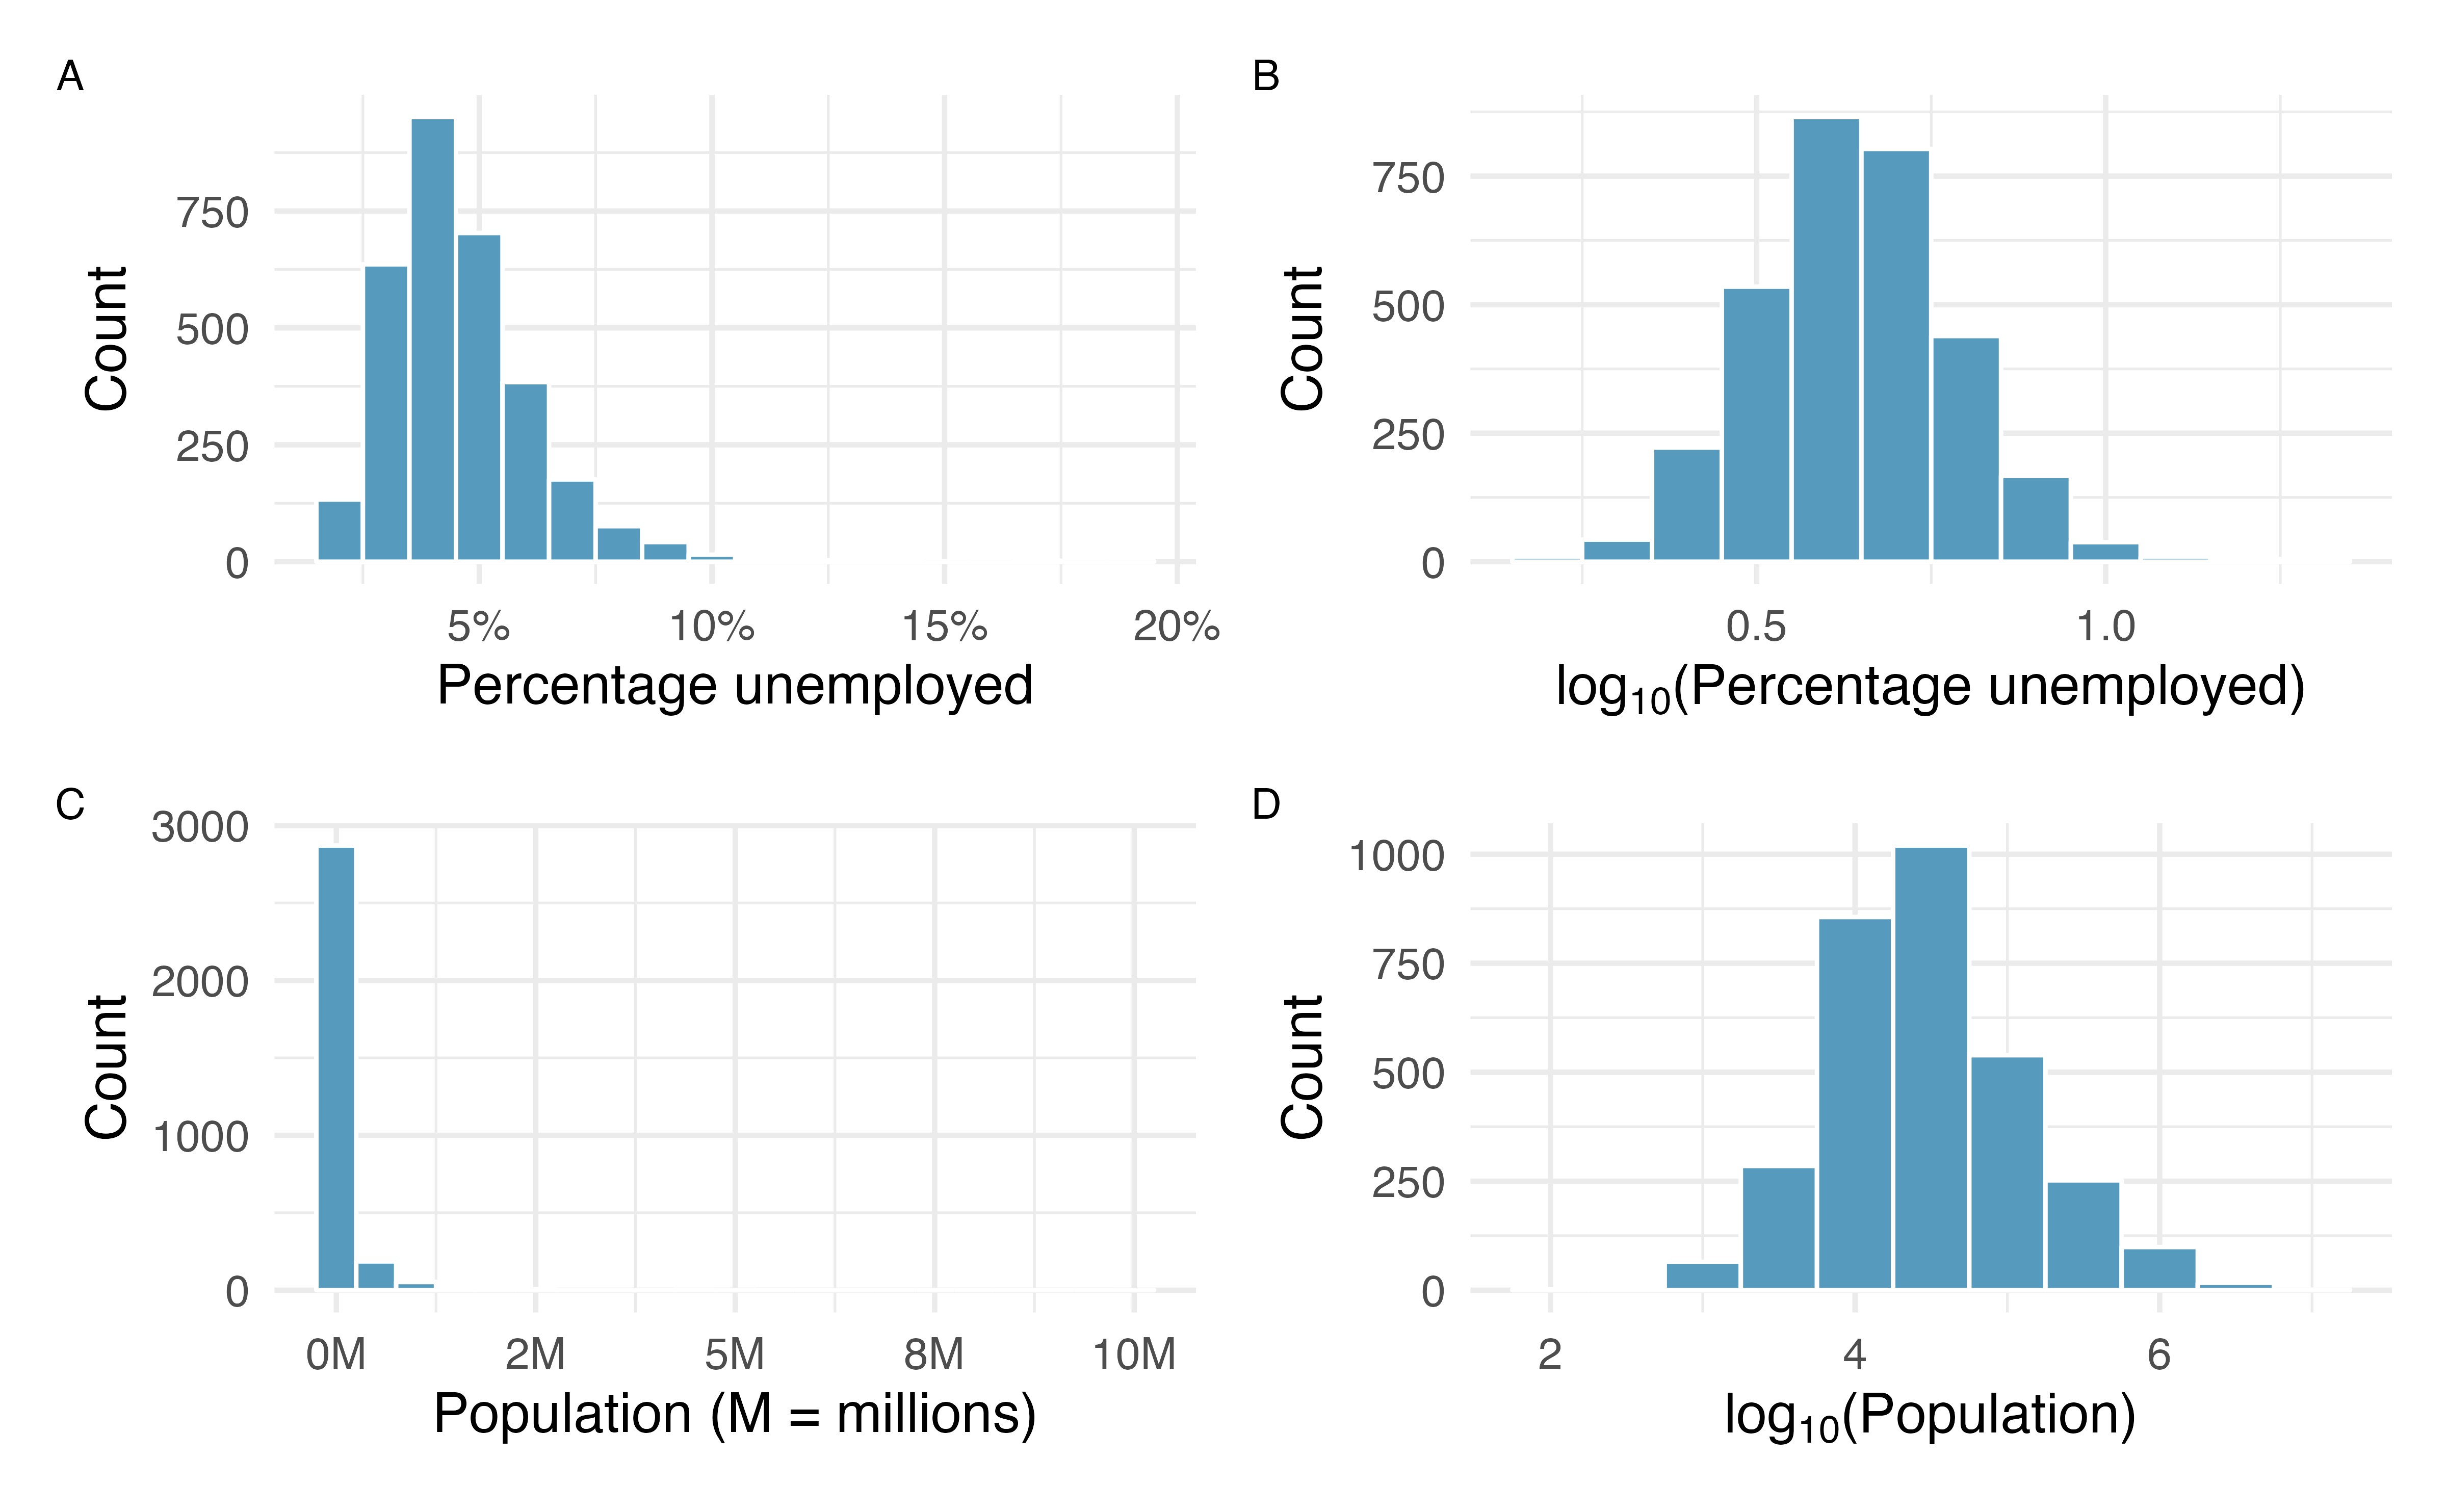 Two pairs of histograms are shown. In the first pair of histograms, percentage of unemployed in all US counties is shown next to the log-10 transformed percentage of unemployed. The raw percent unemployed shows a right-skewed distribution, and the log-10 transformed data is symmetric and bell-shaped. In the second pair of histograms, population of each US county is shown next to the log-10 transformed population.  The raw population is extremely right-skewed, and the log-10 transformed data is reasonably symmetric and bell-shaped.